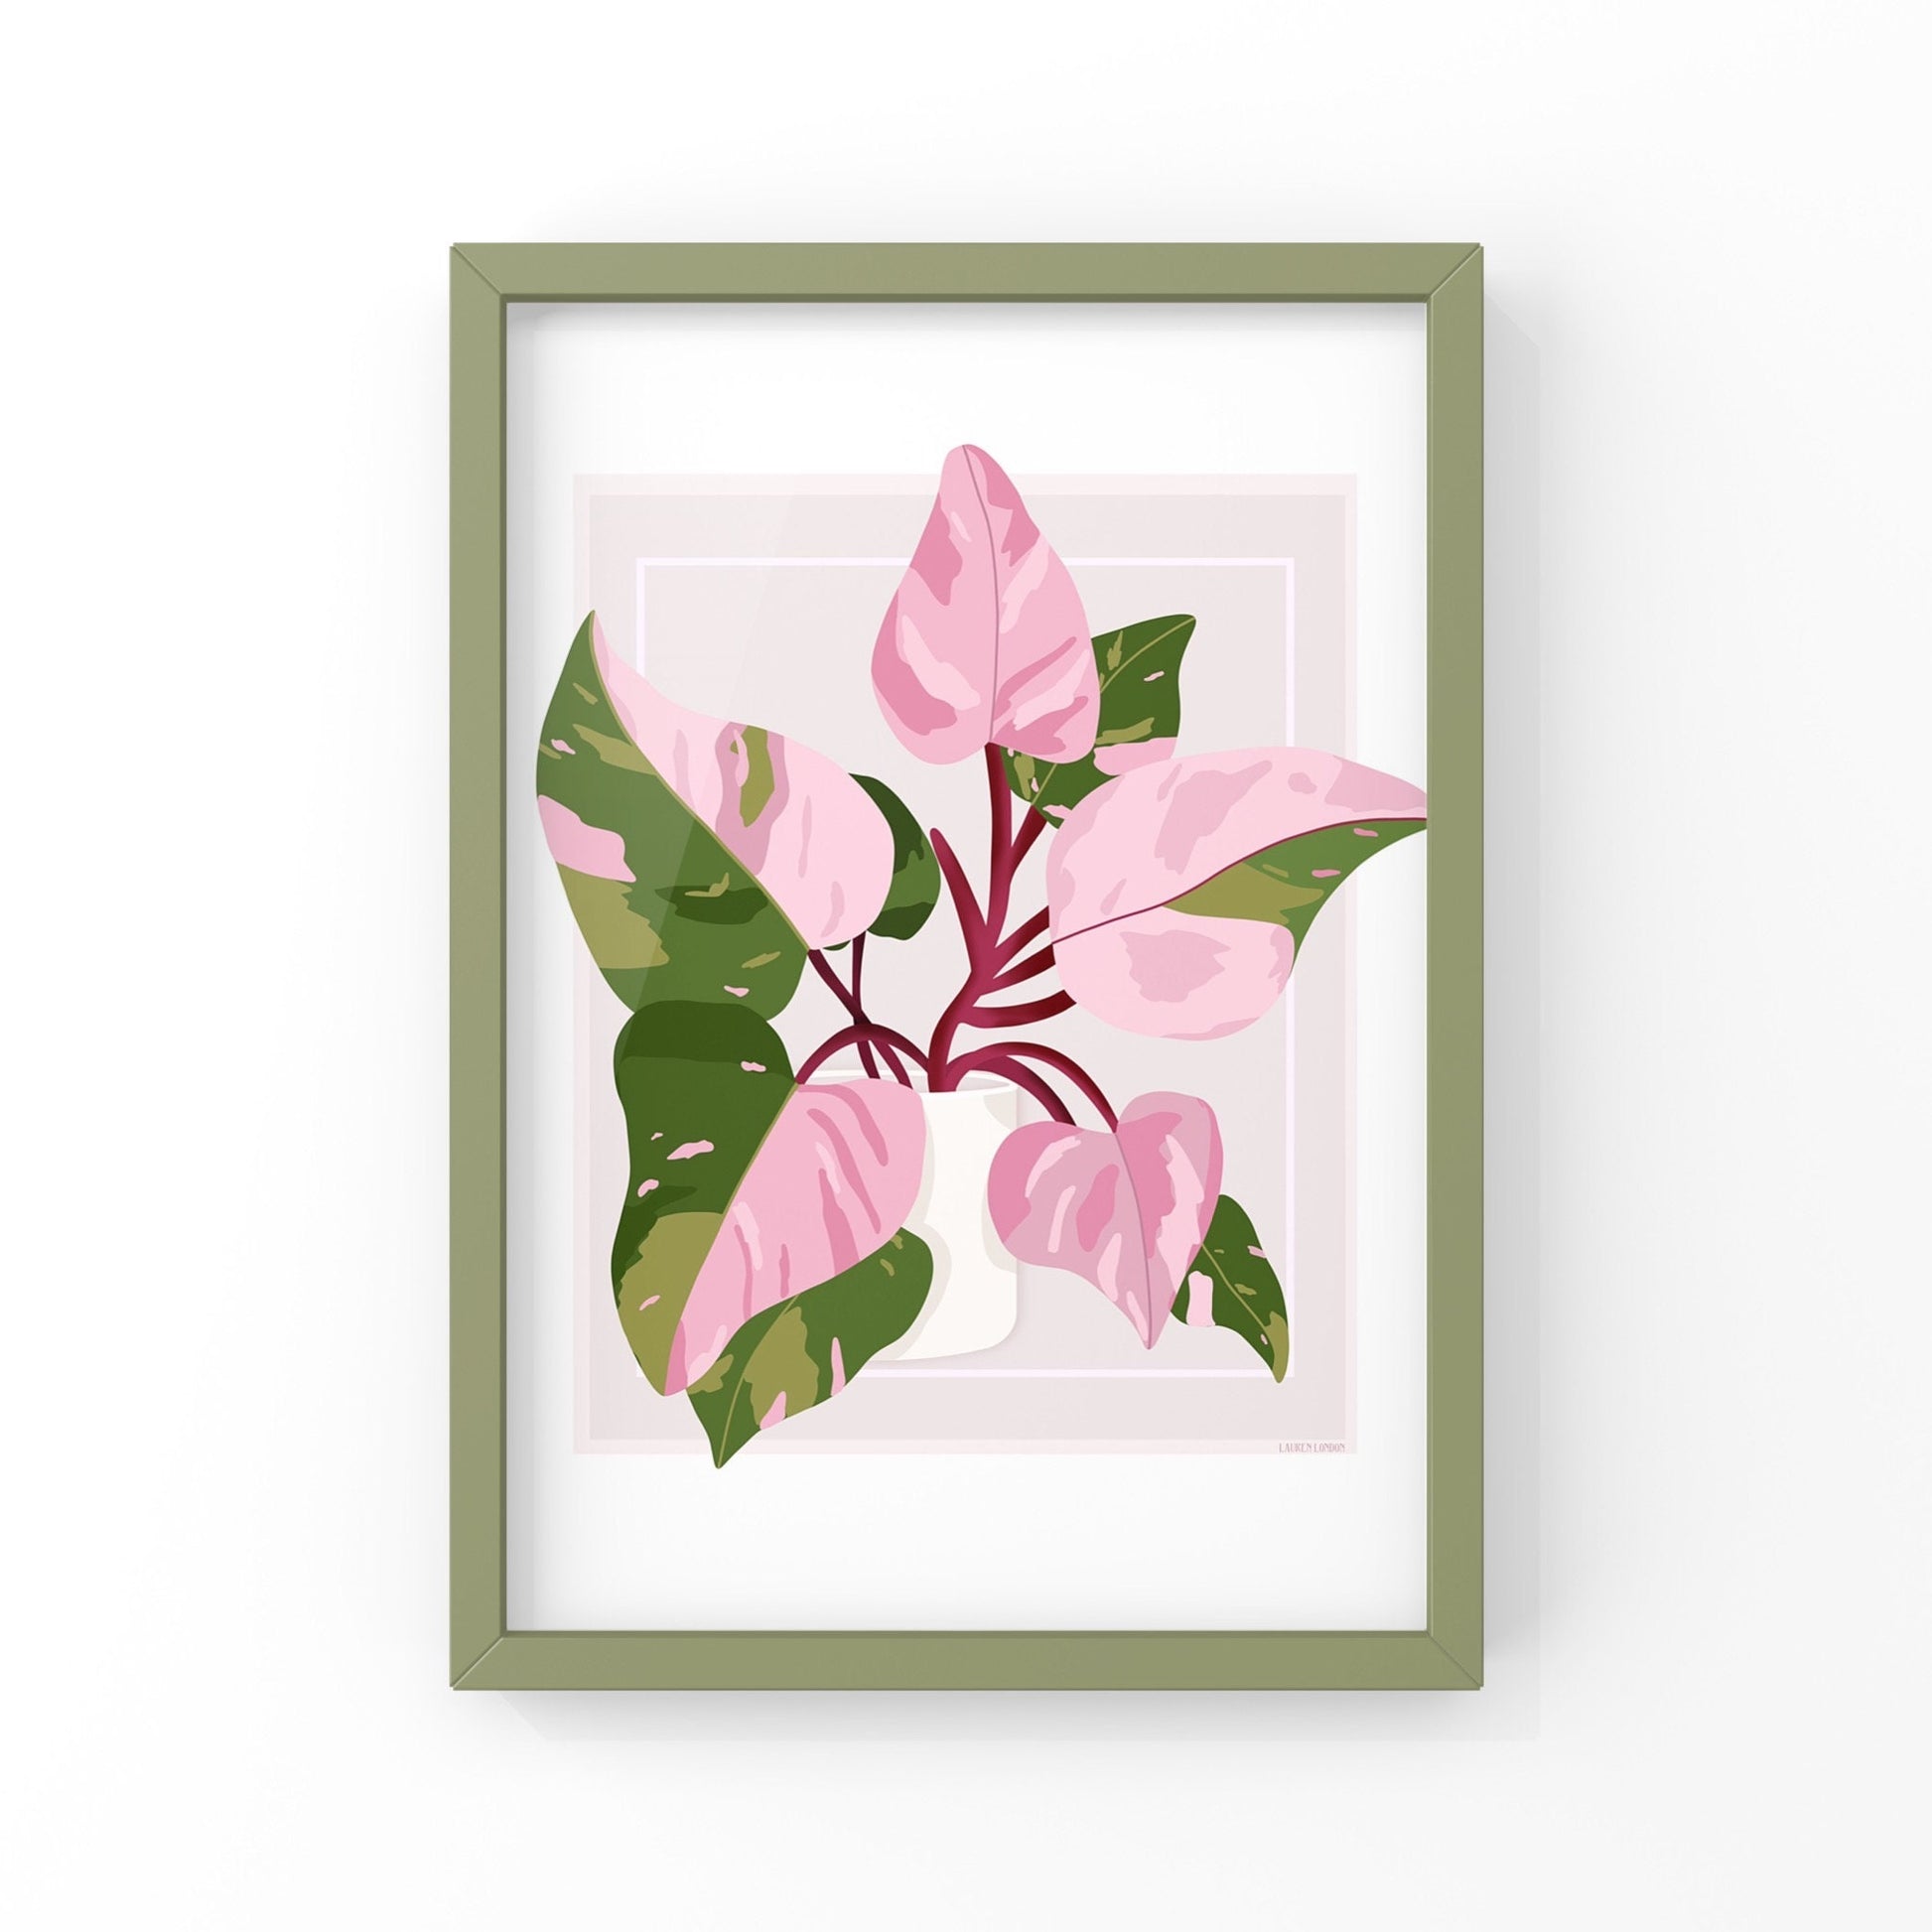 Looking for a unique wall art print!? Look no further because this hand drawn potted plant print is one of a kind. The drawing is of a beautiful pink and green philodendron plant in a white planter. When you frame this house plant art print and hang it up on your wall its simply going to make your space feel more bright, cheerful, and lively! Great for any room in the house and would also make a great gift for a loved one!